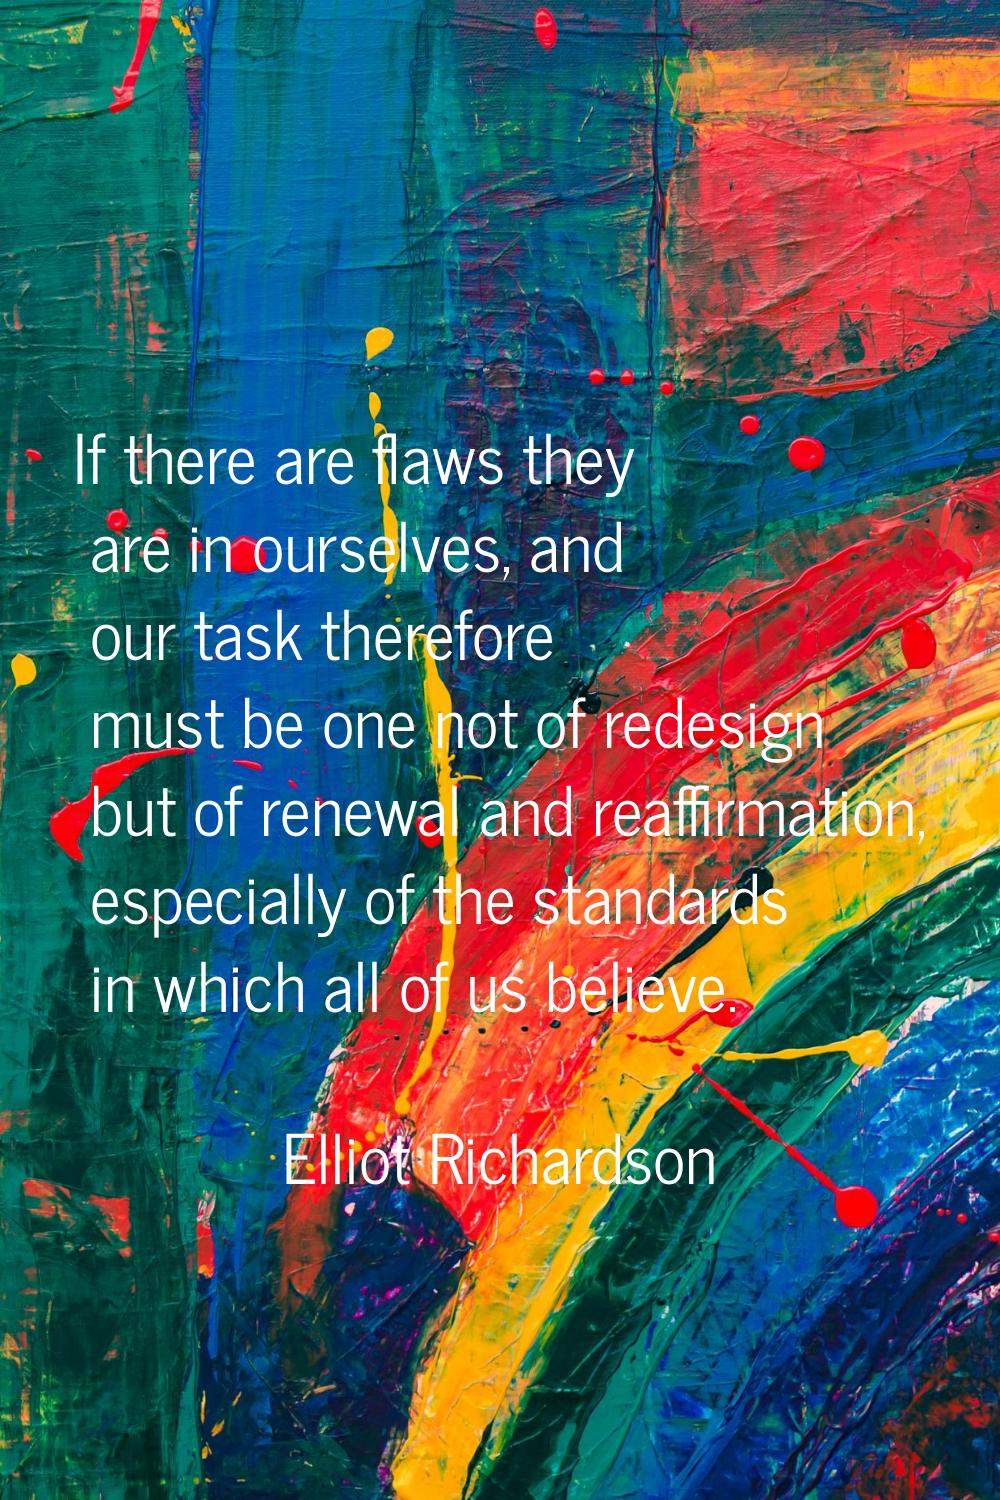 If there are flaws they are in ourselves, and our task therefore must be one not of redesign but of